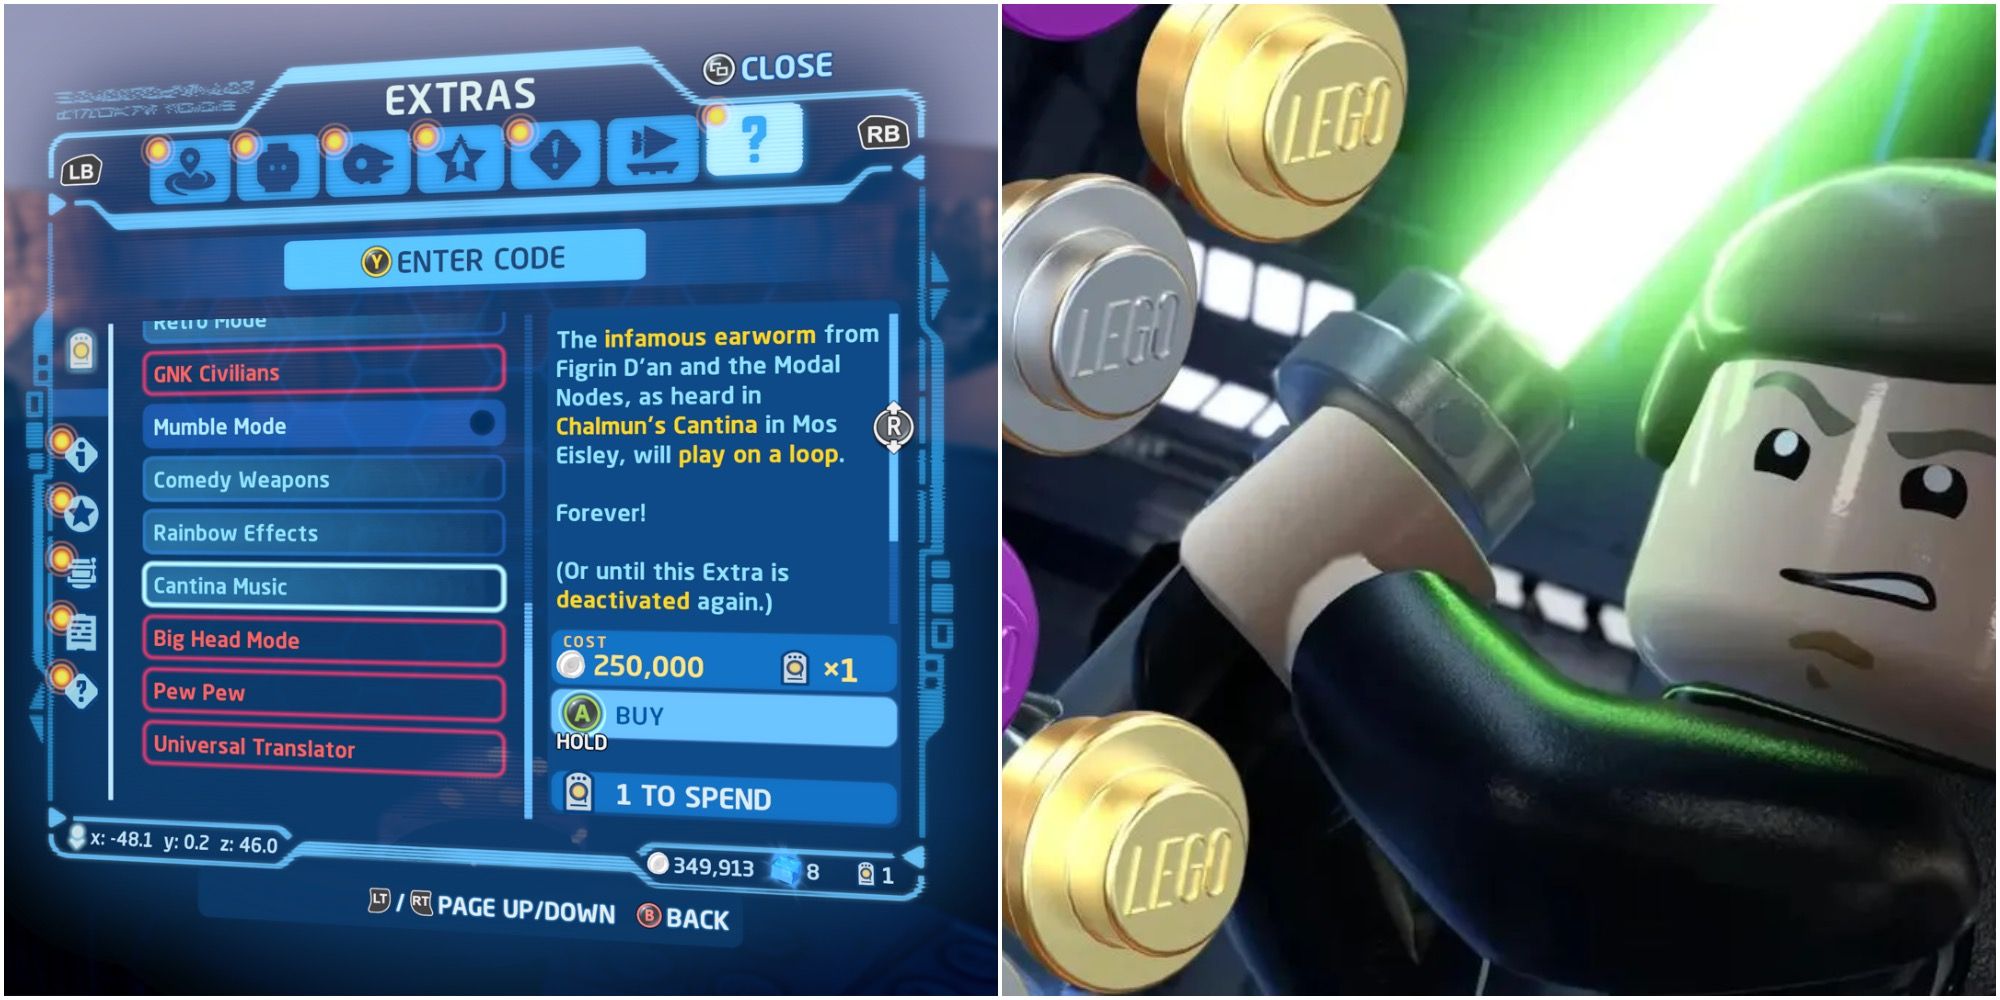 Which Extras Should You Unlock First In Lego Star Wars: The